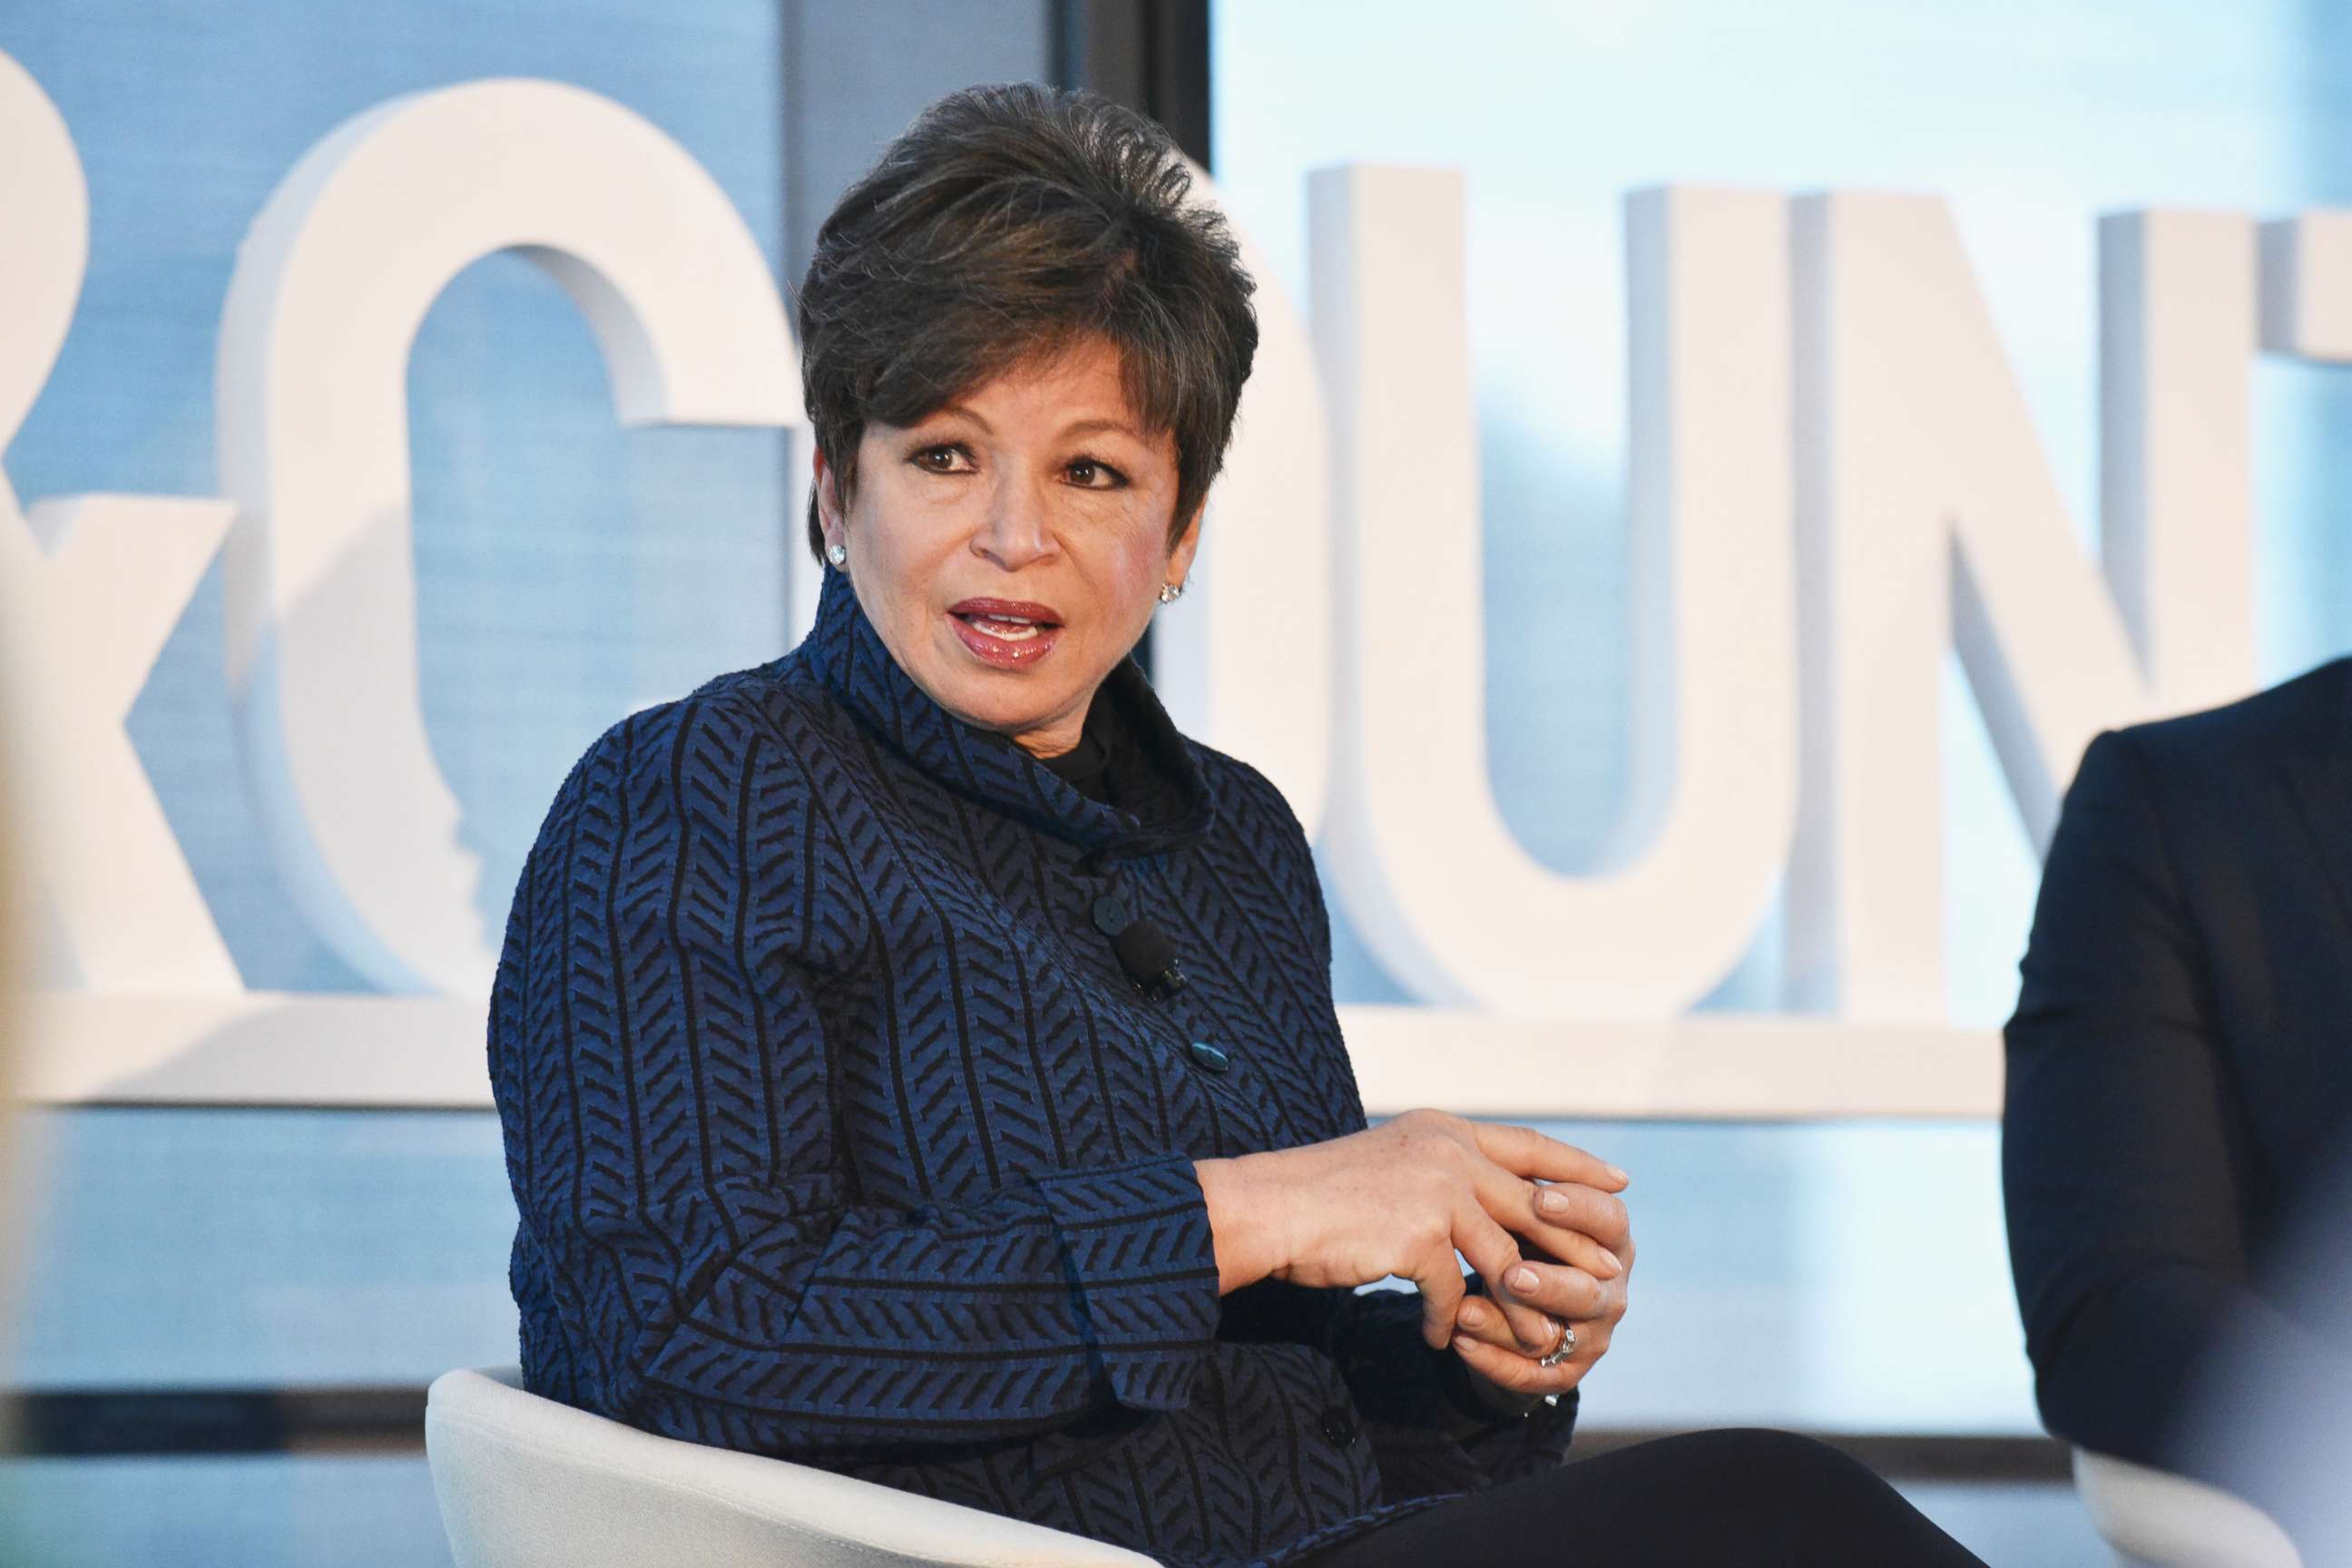 PHOTO: Valerie Jarrett speaks at an event at Hearst Tower on May 9, 2017 in New York.